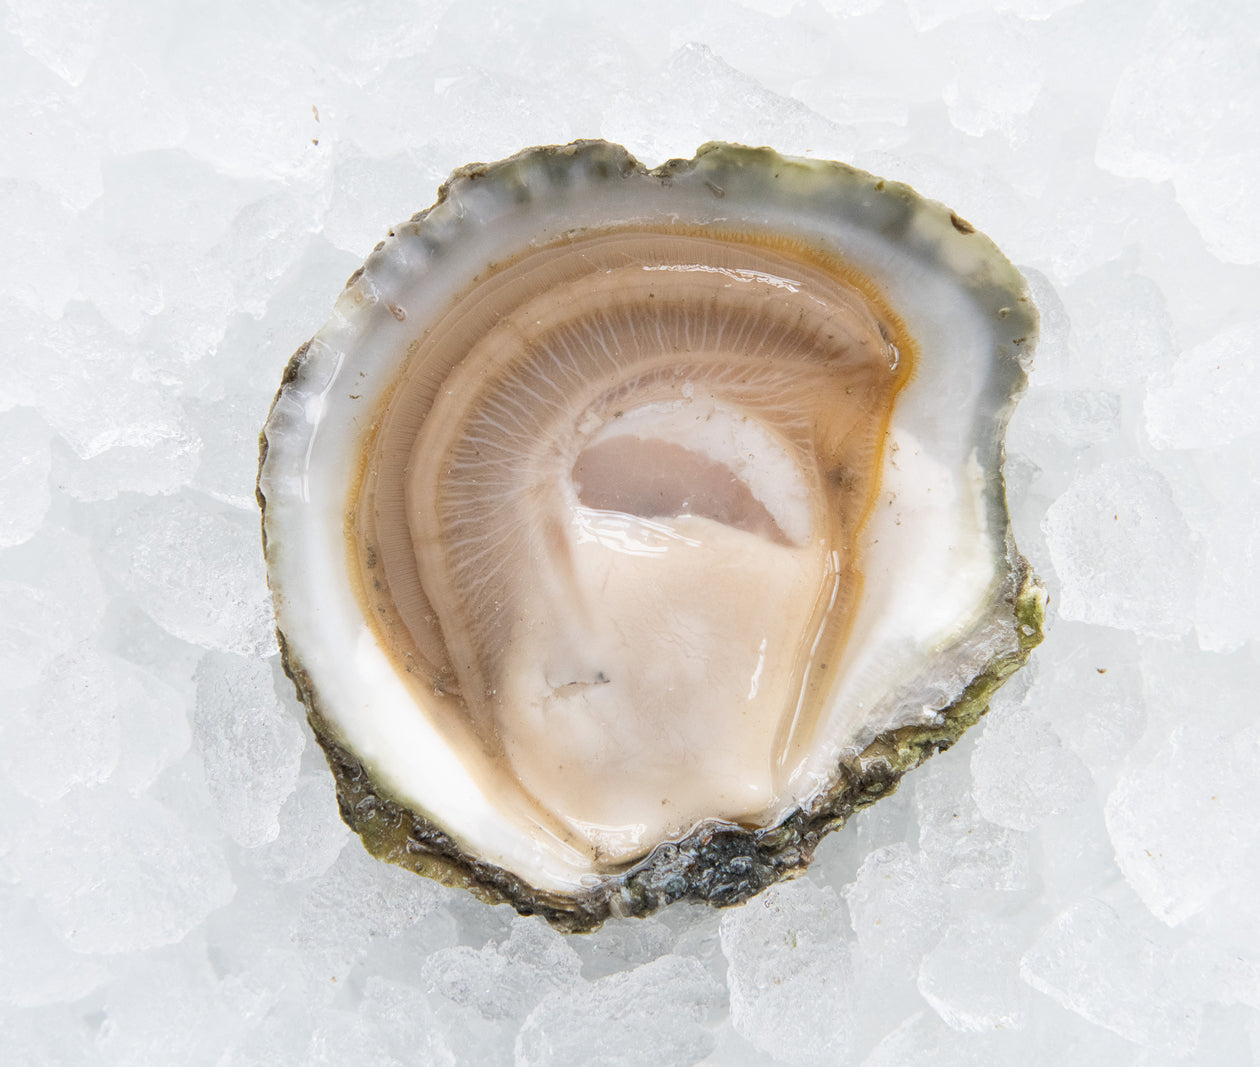 Belon Wild Oysters from Harpswell, ME